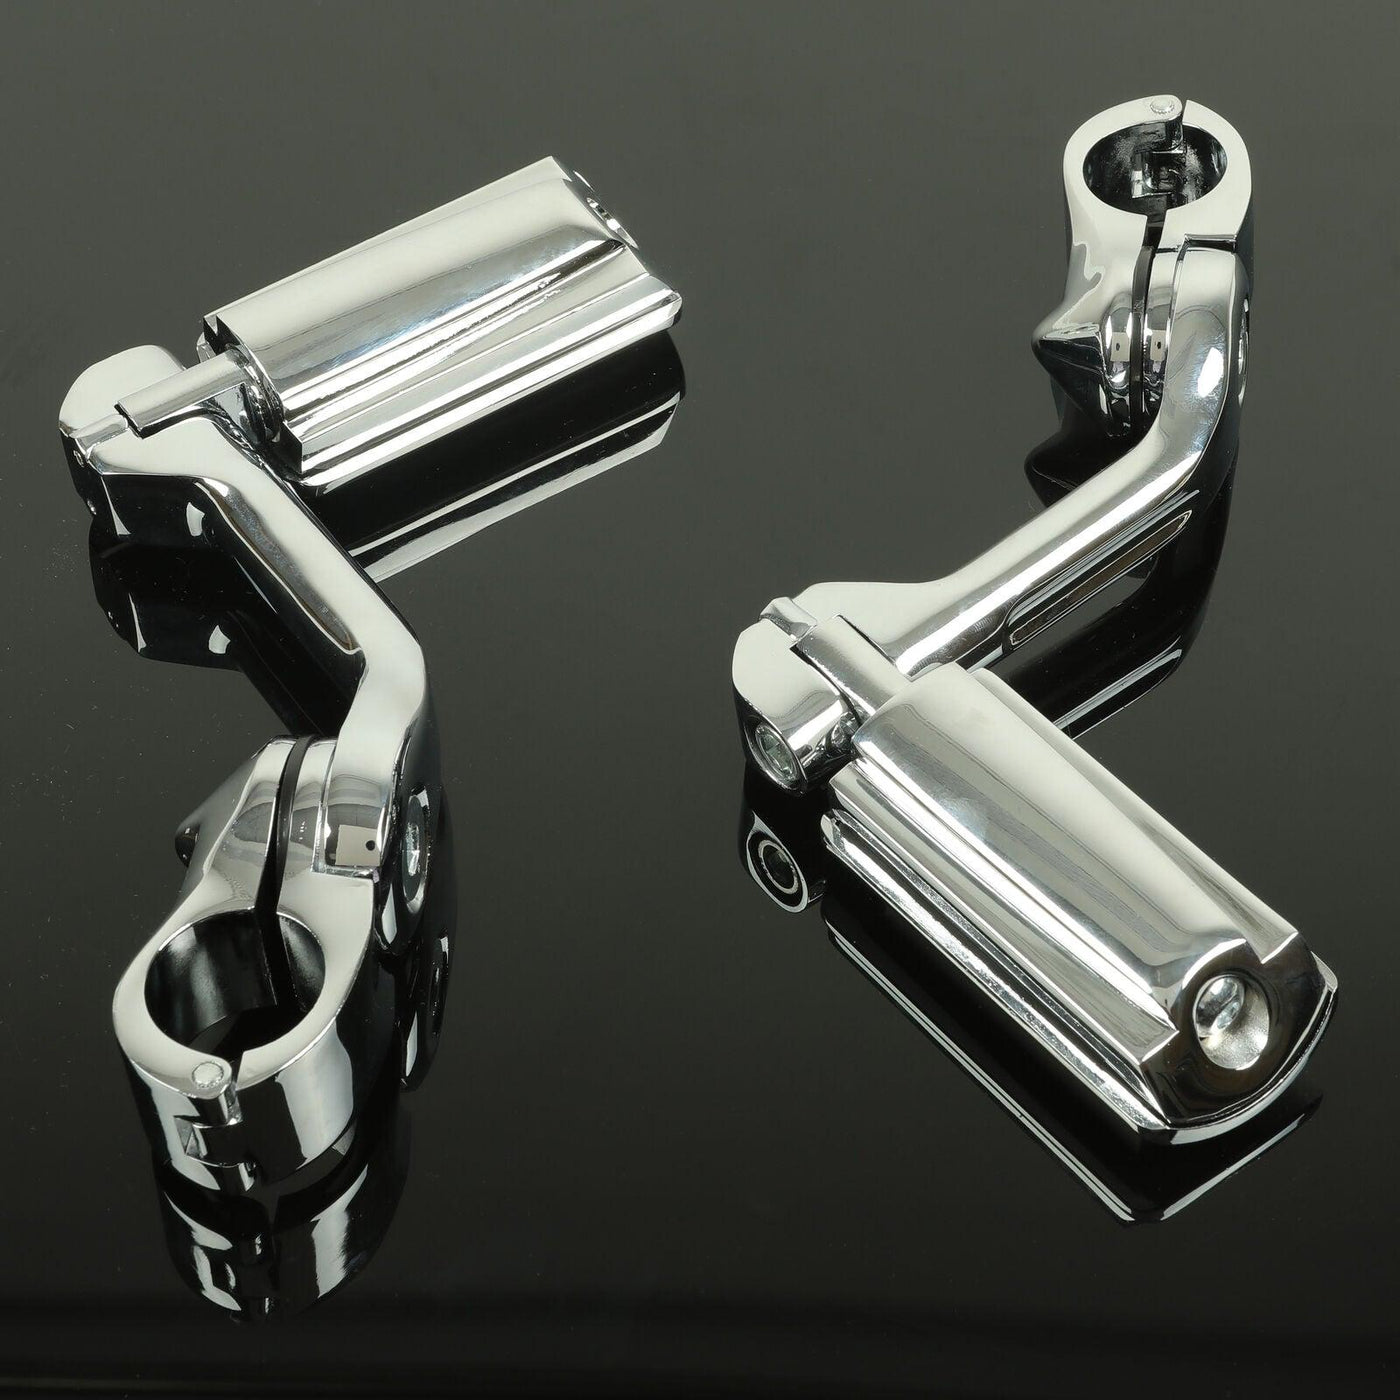 Long Highway Foot Pegs Fit For Harley Electra Road King Street Glide 1-1/4" Bars - Moto Life Products